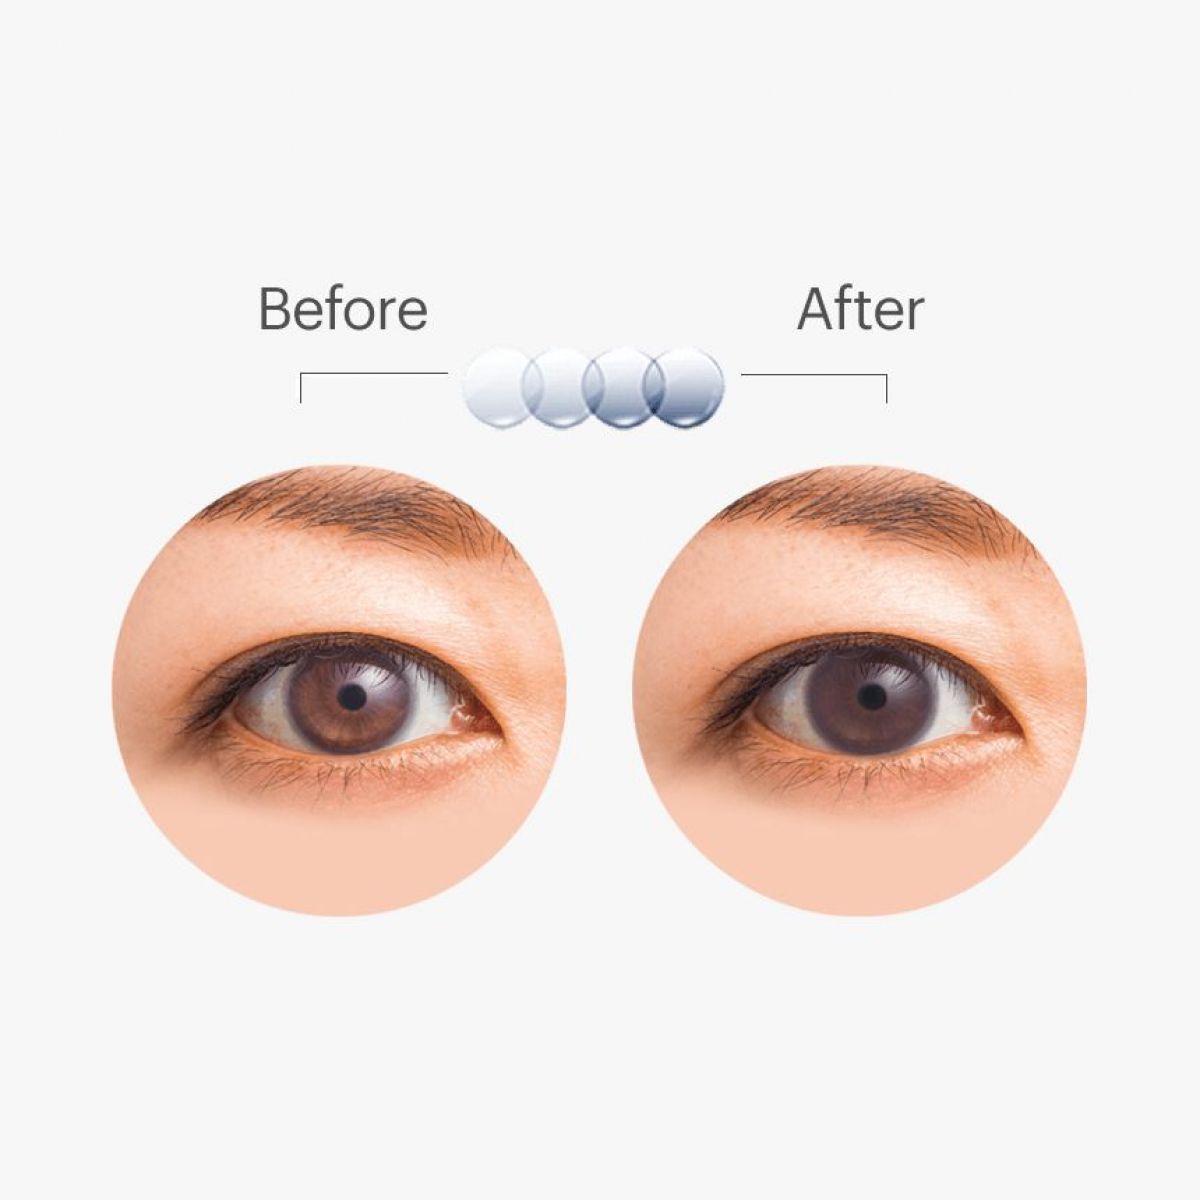 ACUVUE OASYS WITH TRANSITIONS PHOTOCHROMIC BIWEEKLY CONTACT LENSES (6 LENSES)